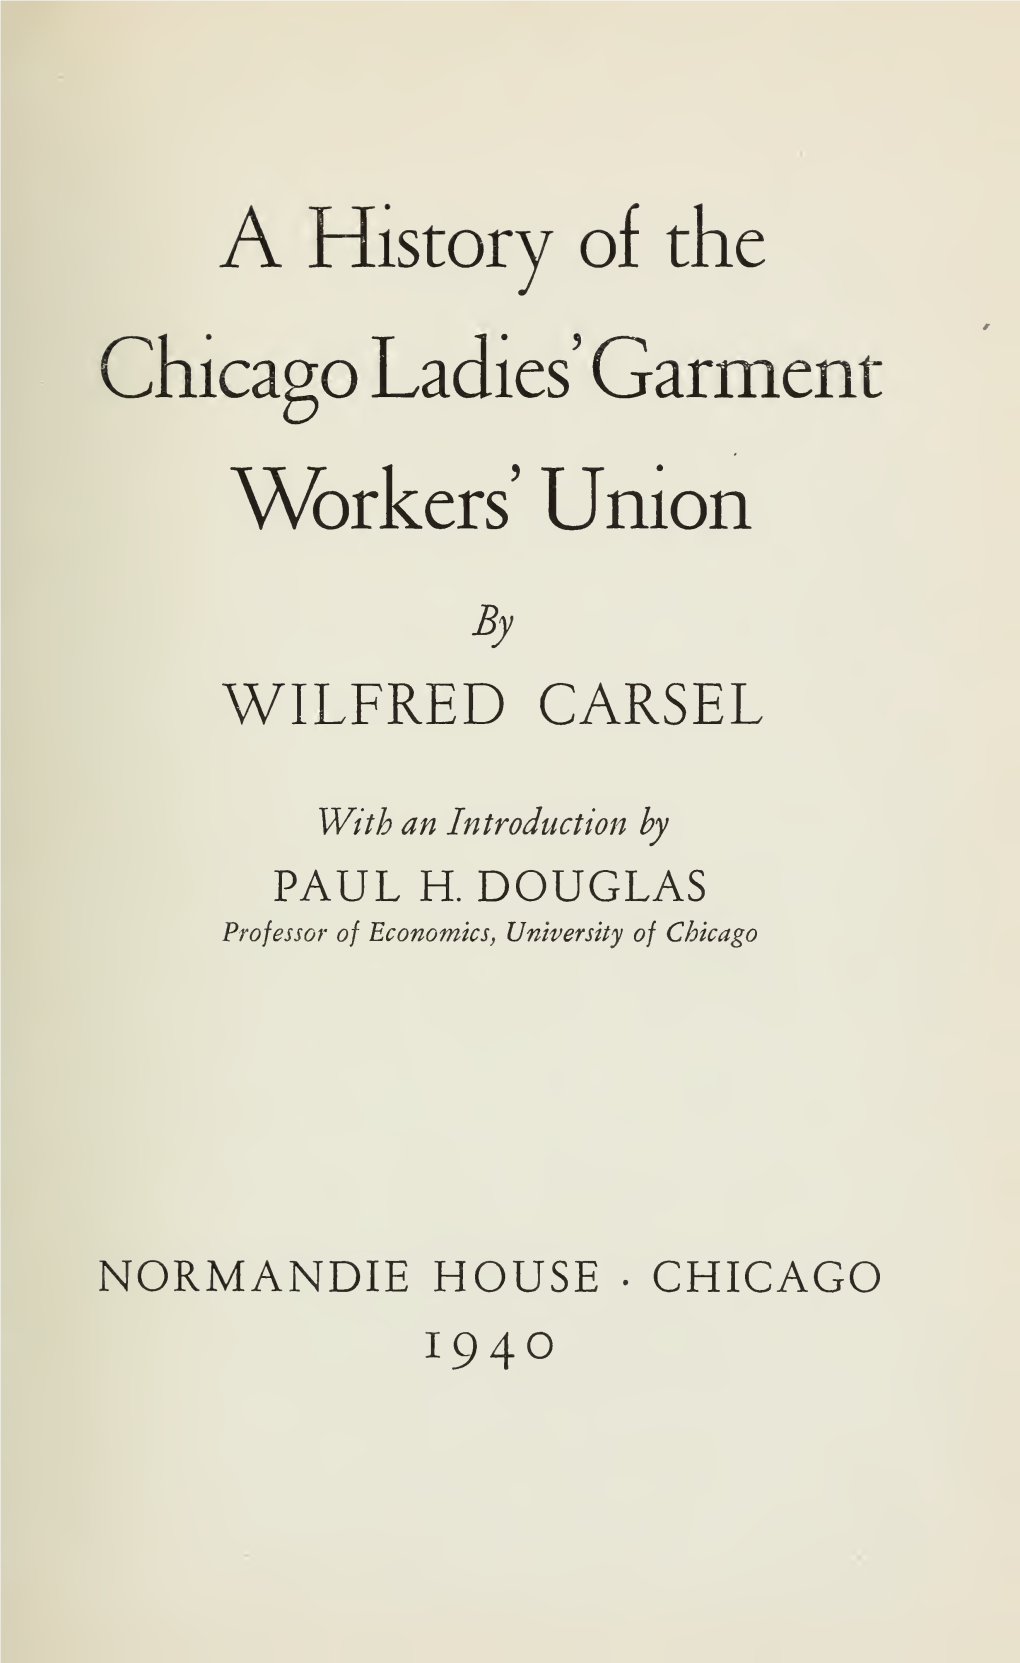 A History of the Chicago Ladies' Garment Workers' Union